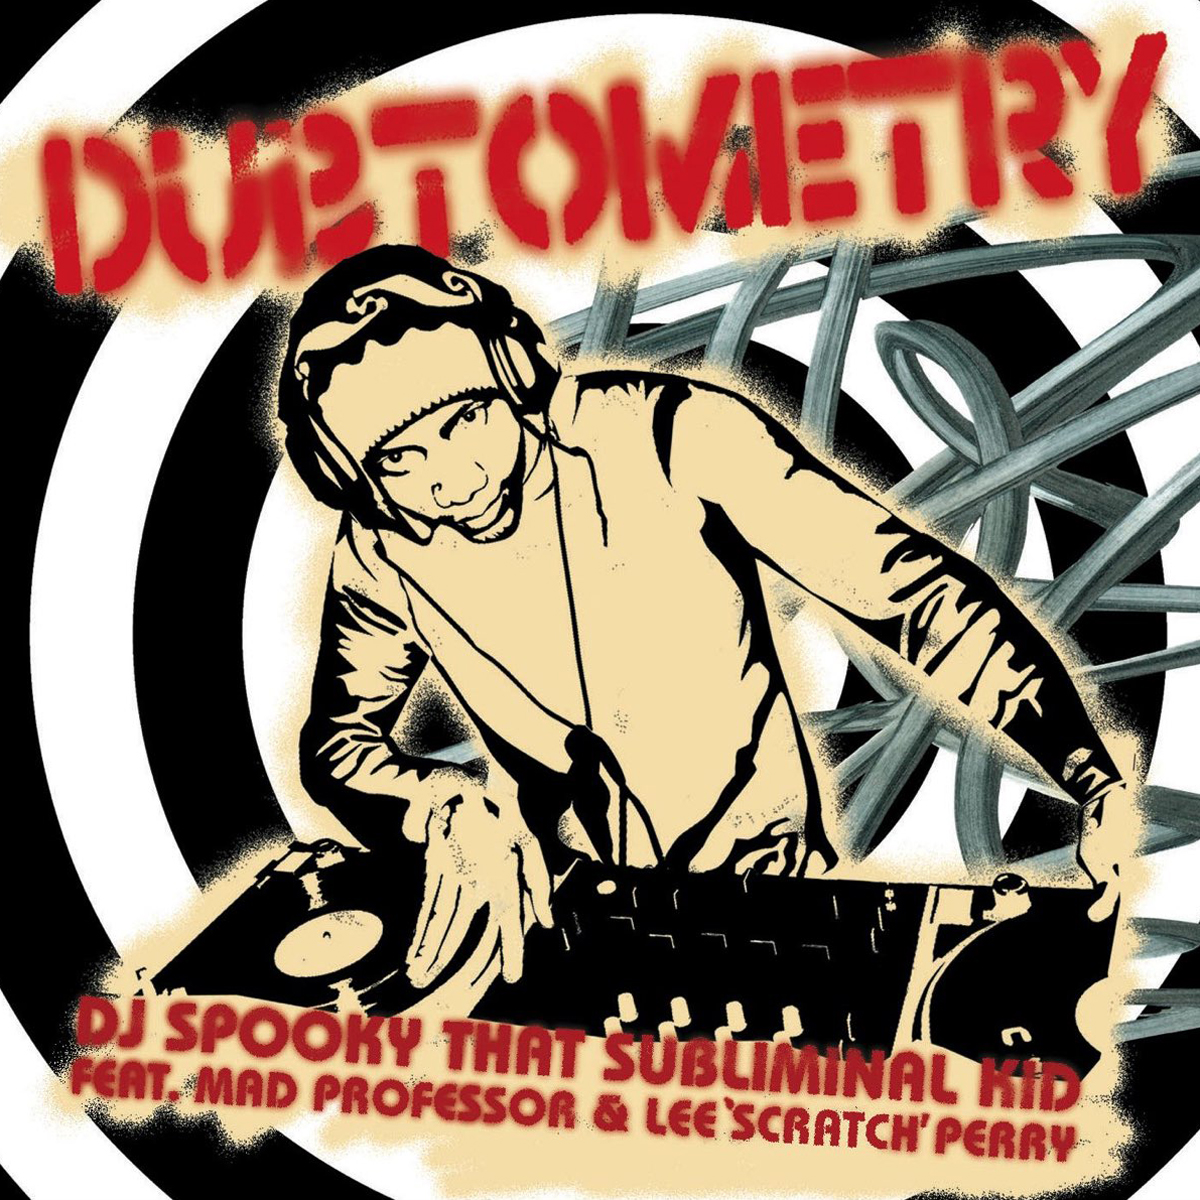 DJ Spooky That Subliminal Kid feat. Mad Professor & Lee "Scratch" Perry 'Dubtometry'